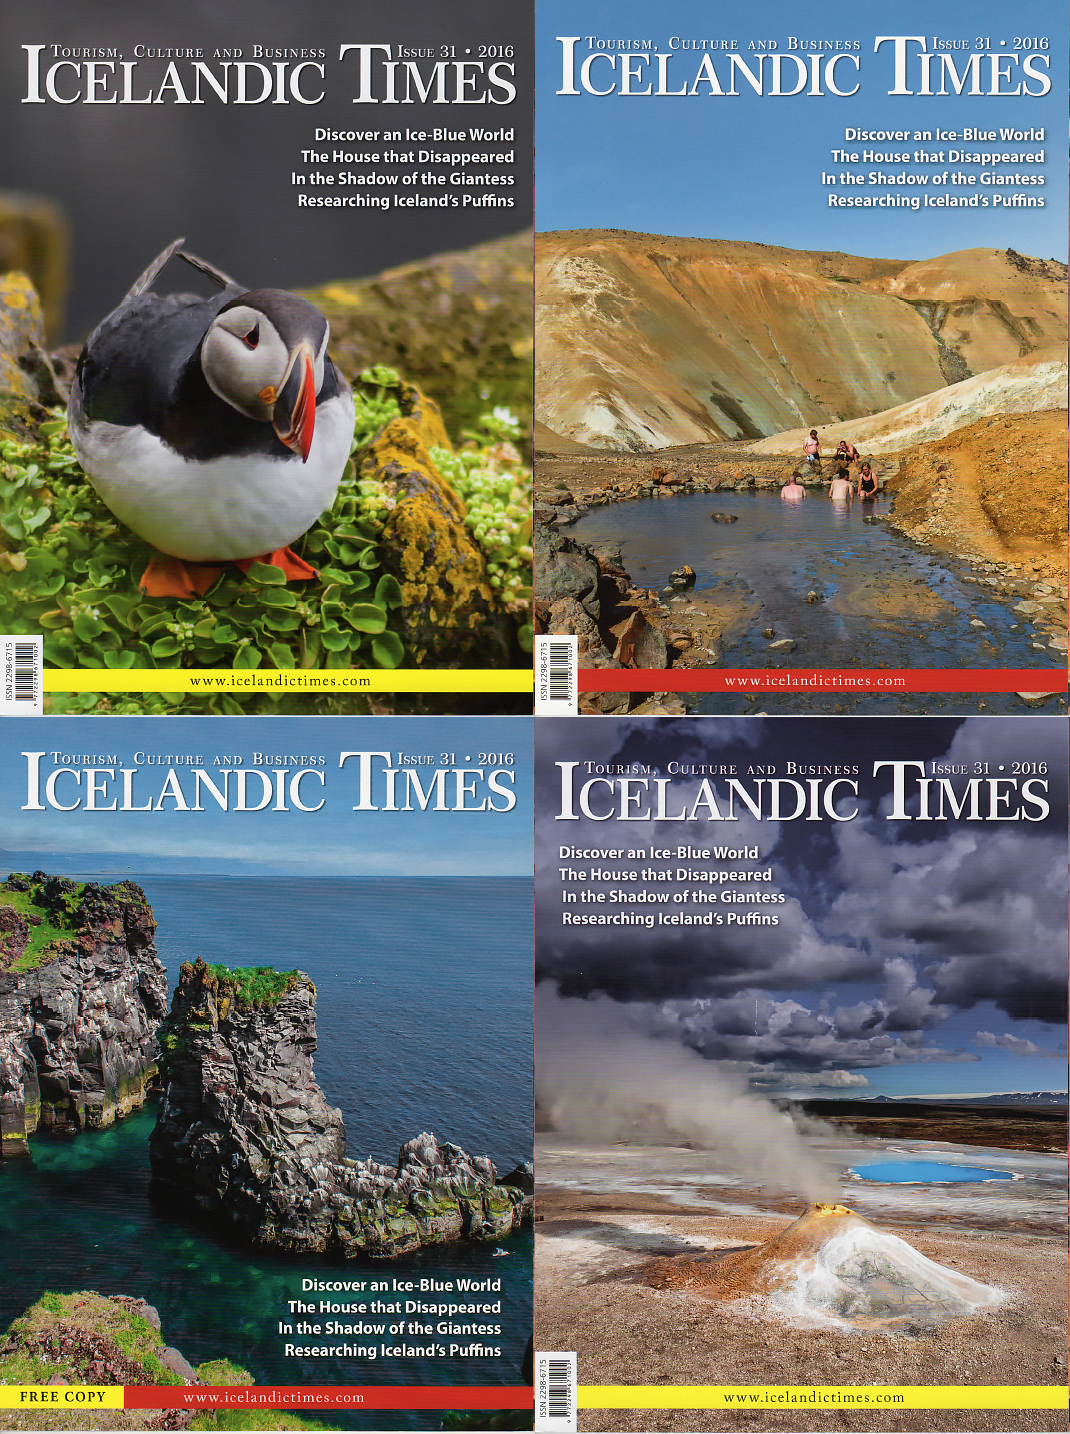 I have ALL four front pages on the latest issue (31) of “Icelandic Times Magazine”